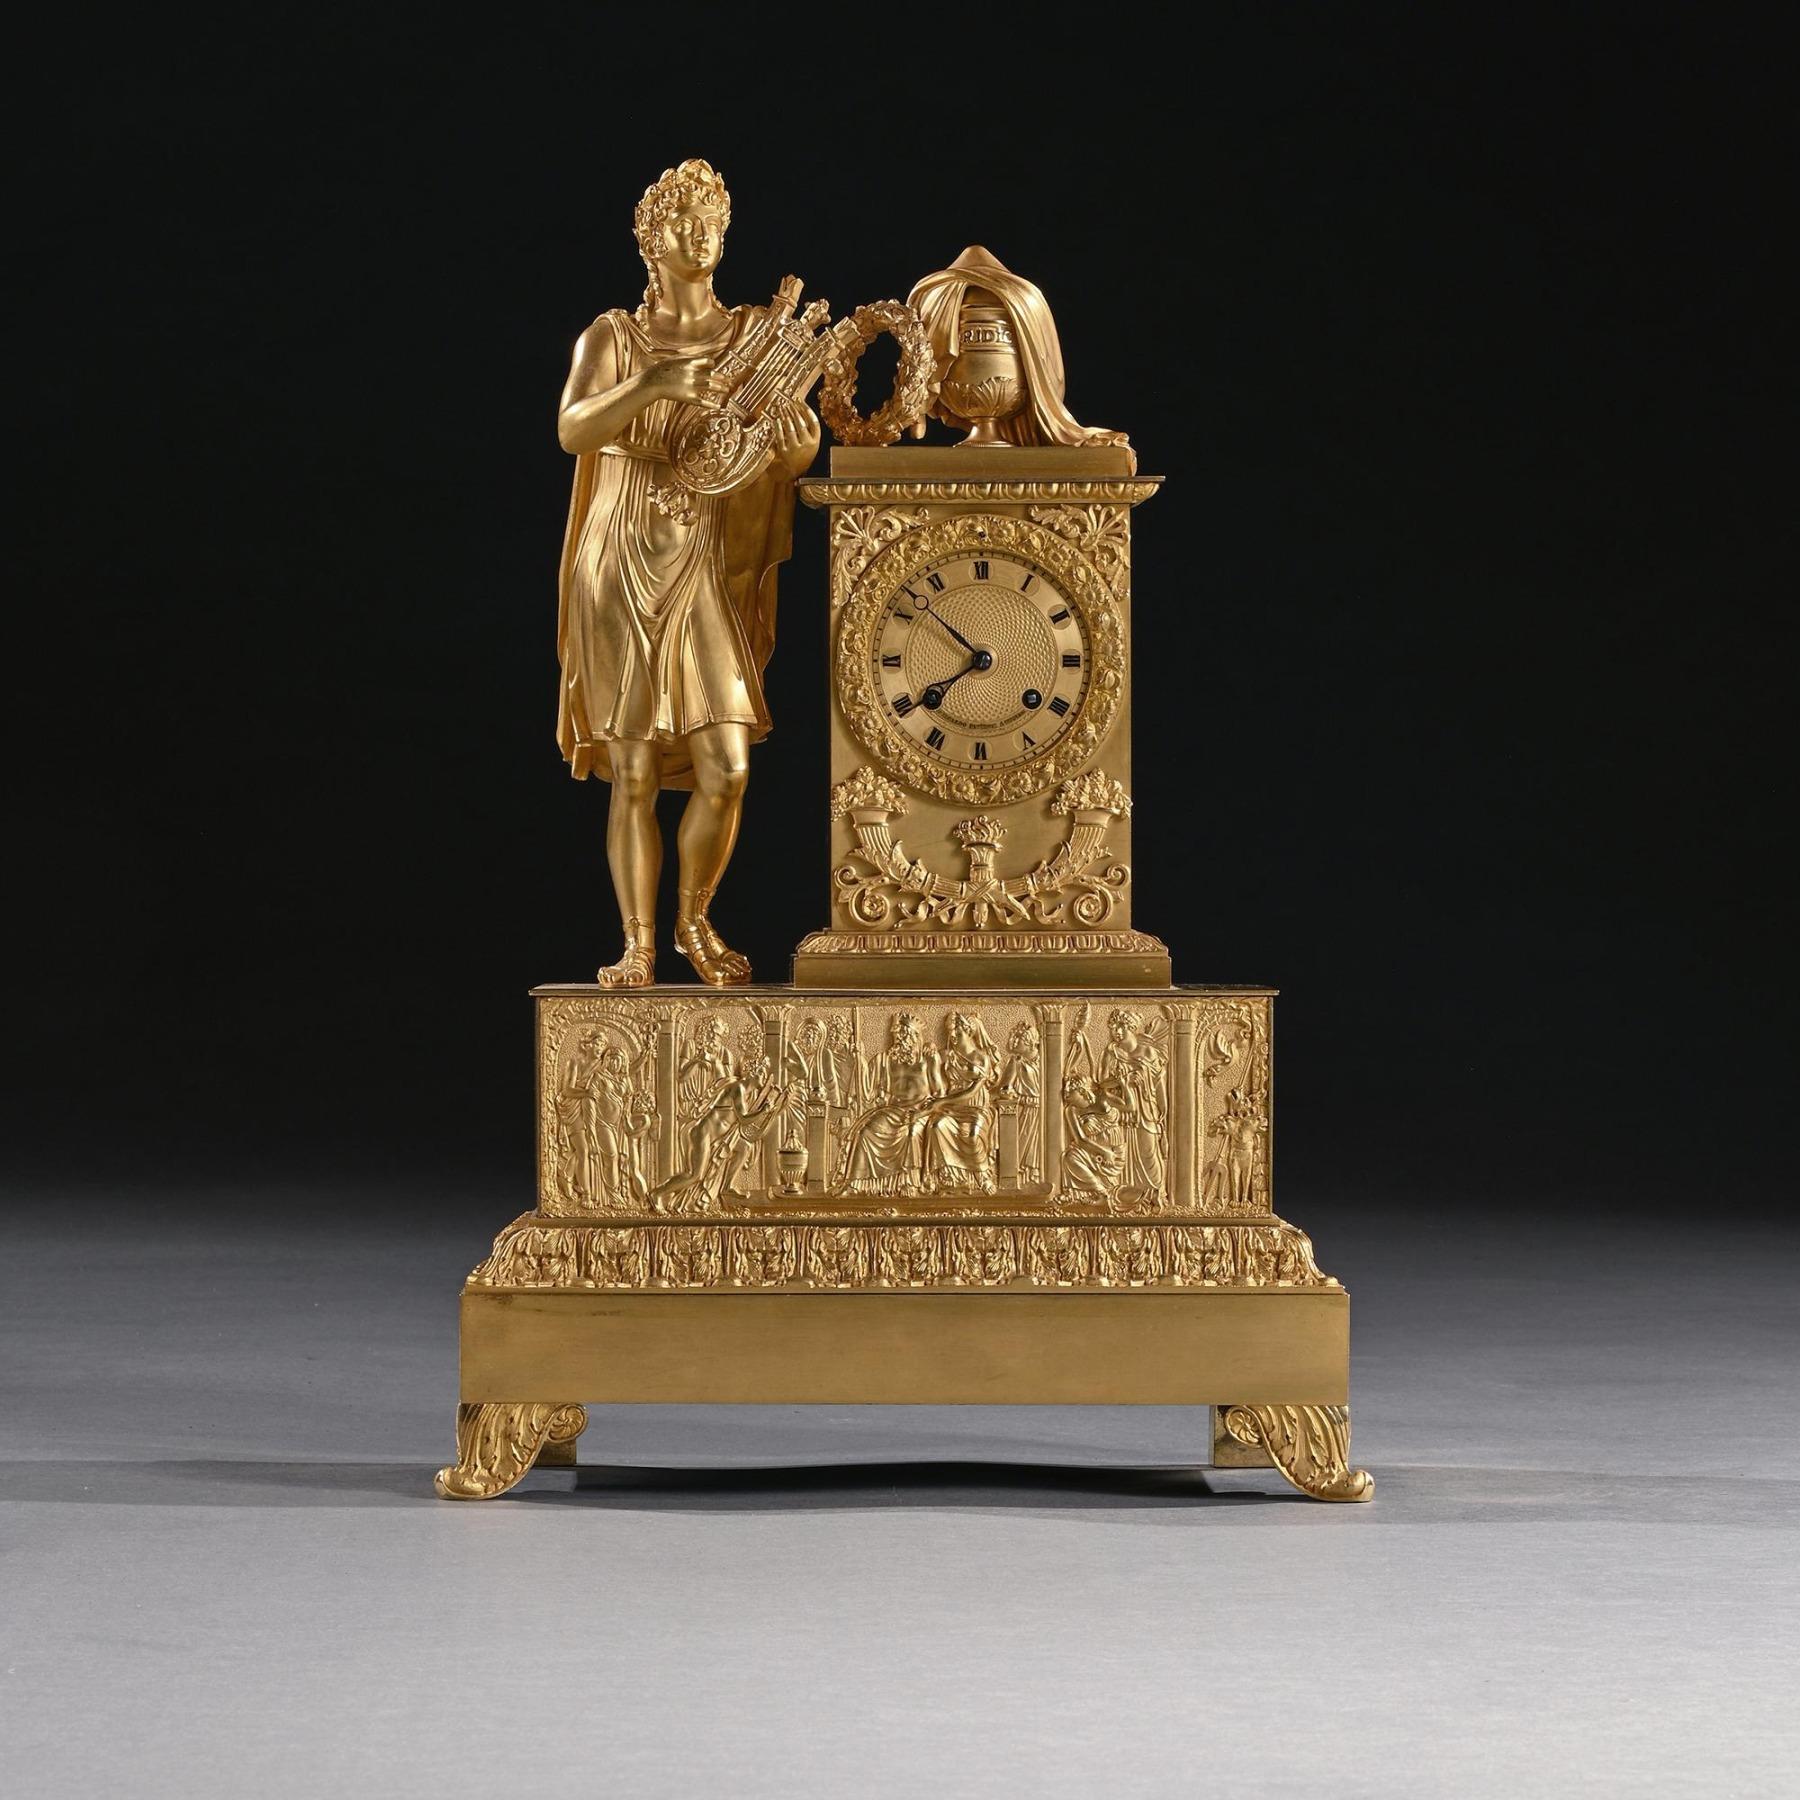 A large and impressive French Empire period gilt bronze mantel clock of exceptional quality and colour.

French (possibly retailed in Italy) - Circa 1820.

The finely chased and original gilt bronze case depicting Orpheus playing his lyre with an